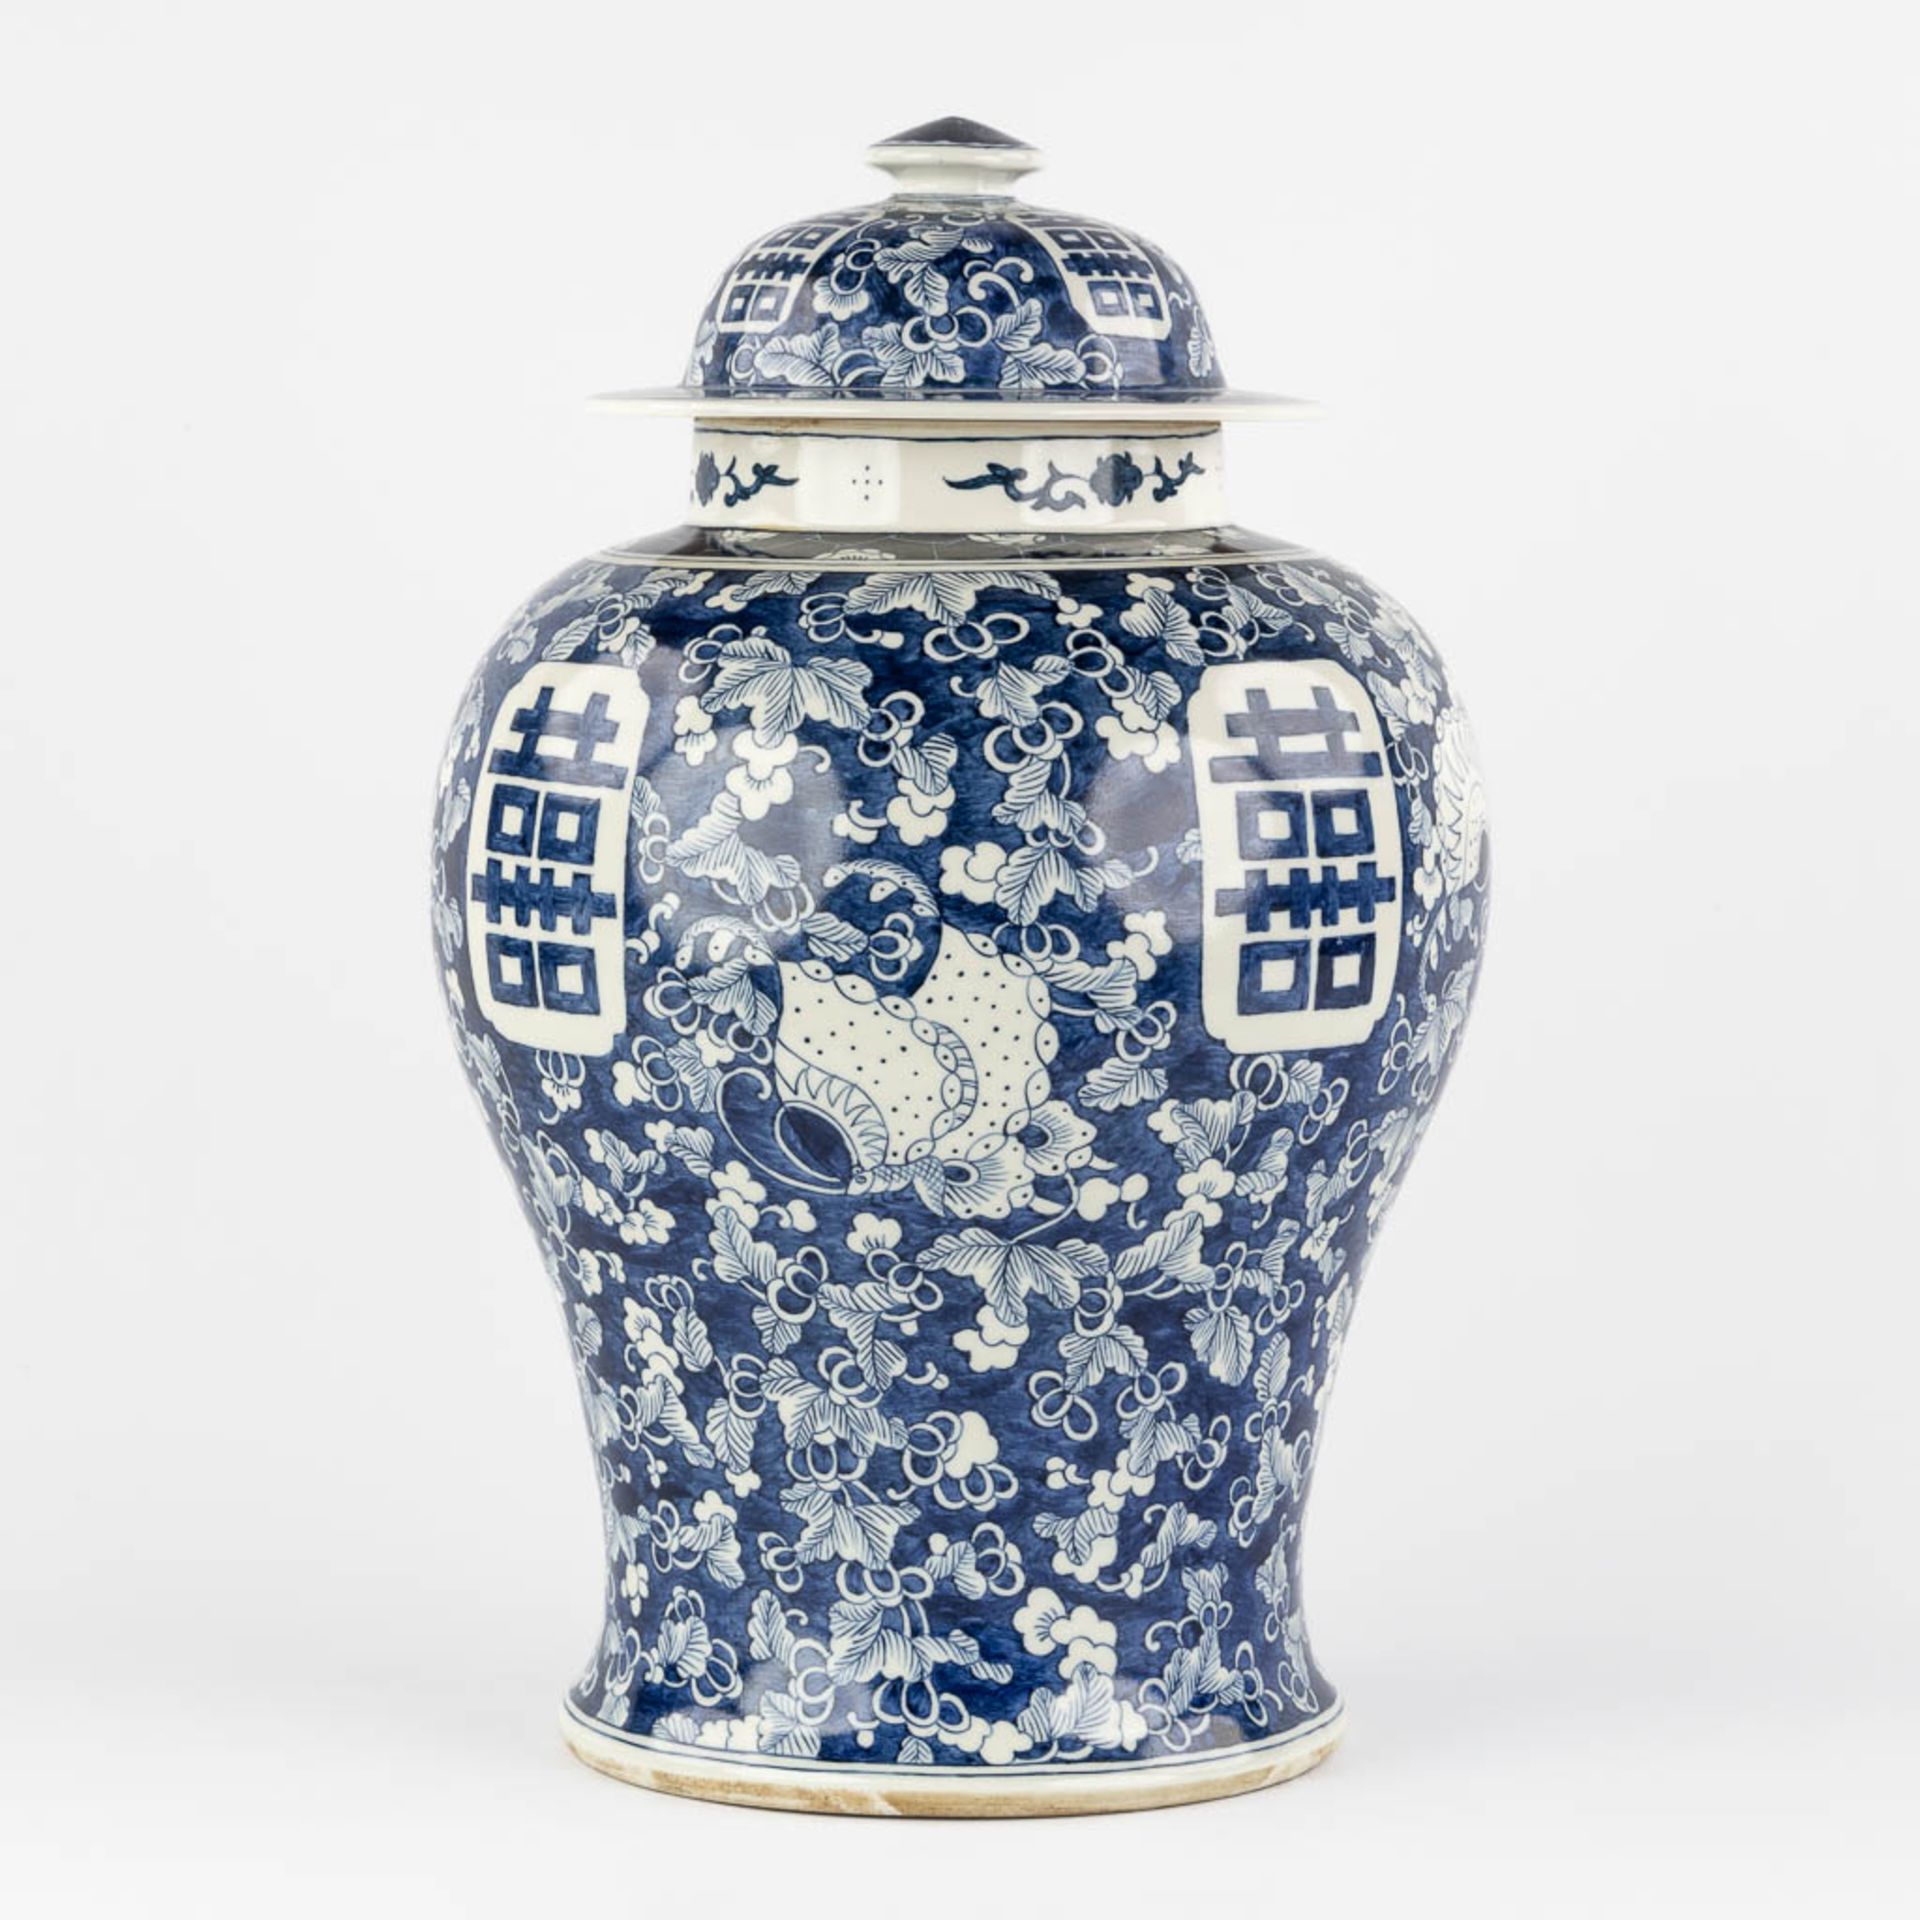 A Chinese baluster vase, blue-white with a Prunus decor and double XI sign. 19th/20th C. (H:42 x D:2 - Image 9 of 17